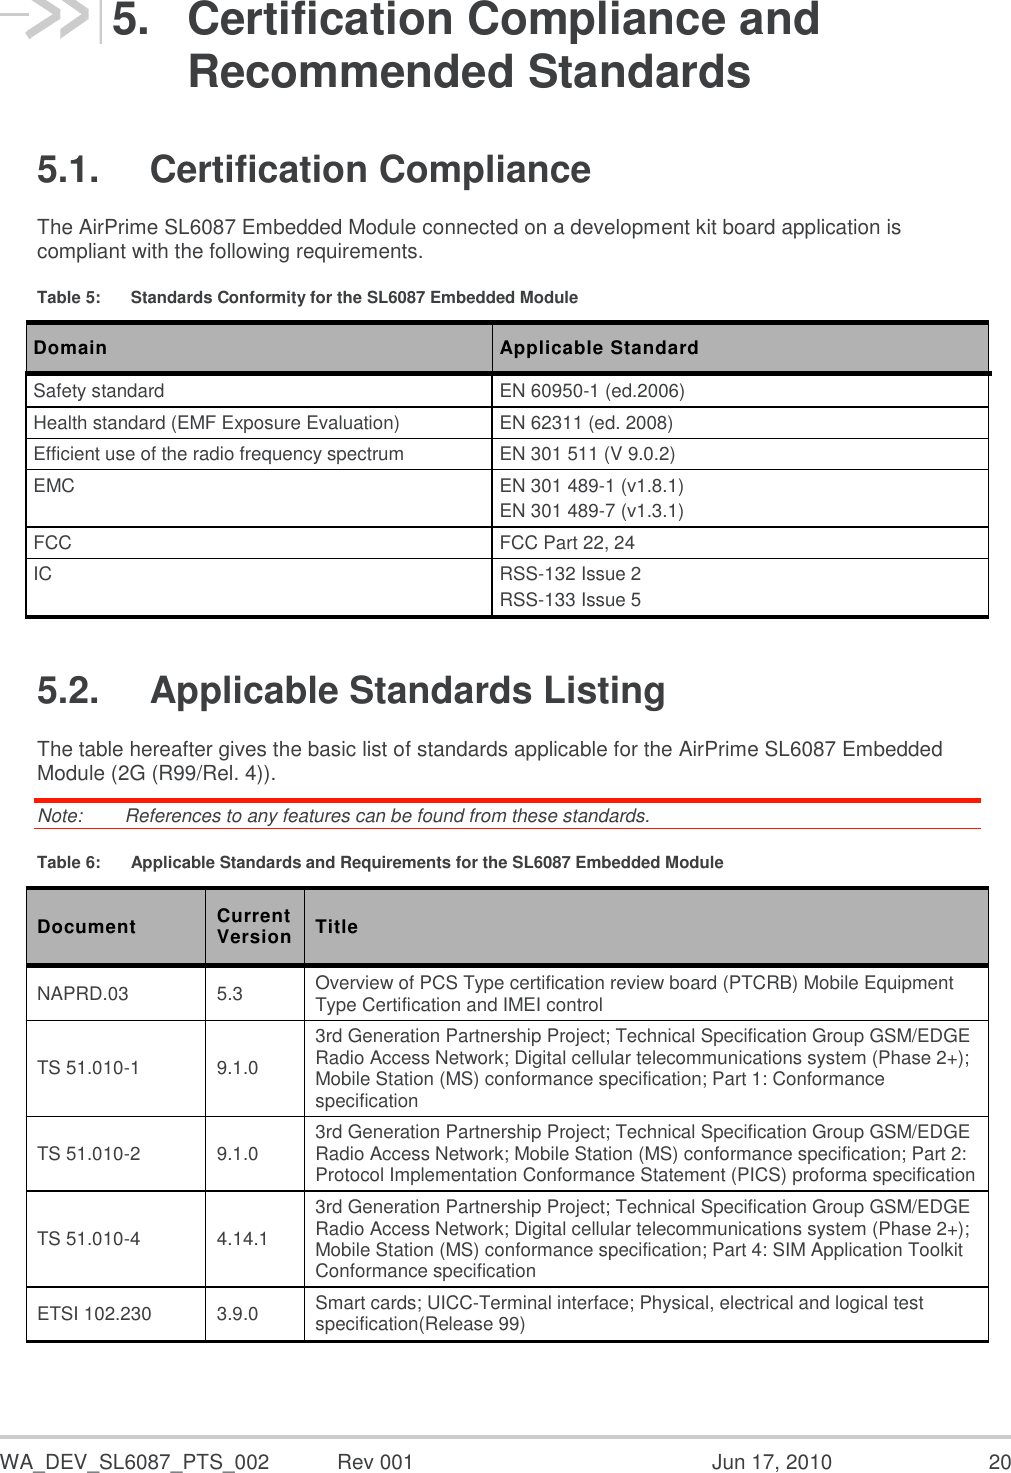  WA_DEV_SL6087_PTS_002  Rev 001  Jun 17, 2010  20 5.  Certification Compliance and Recommended Standards 5.1.  Certification Compliance The AirPrime SL6087 Embedded Module connected on a development kit board application is compliant with the following requirements. Table 5:  Standards Conformity for the SL6087 Embedded Module Domain Applicable Standard Safety standard EN 60950-1 (ed.2006) Health standard (EMF Exposure Evaluation) EN 62311 (ed. 2008) Efficient use of the radio frequency spectrum EN 301 511 (V 9.0.2) EMC EN 301 489-1 (v1.8.1) EN 301 489-7 (v1.3.1) FCC FCC Part 22, 24  IC RSS-132 Issue 2 RSS-133 Issue 5 5.2.  Applicable Standards Listing The table hereafter gives the basic list of standards applicable for the AirPrime SL6087 Embedded Module (2G (R99/Rel. 4)).  Note:   References to any features can be found from these standards. Table 6:  Applicable Standards and Requirements for the SL6087 Embedded Module Document Current Version Title NAPRD.03 5.3 Overview of PCS Type certification review board (PTCRB) Mobile Equipment Type Certification and IMEI control  TS 51.010-1 9.1.0 3rd Generation Partnership Project; Technical Specification Group GSM/EDGE Radio Access Network; Digital cellular telecommunications system (Phase 2+); Mobile Station (MS) conformance specification; Part 1: Conformance specification  TS 51.010-2  9.1.0 3rd Generation Partnership Project; Technical Specification Group GSM/EDGE Radio Access Network; Mobile Station (MS) conformance specification; Part 2: Protocol Implementation Conformance Statement (PICS) proforma specification  TS 51.010-4  4.14.1  3rd Generation Partnership Project; Technical Specification Group GSM/EDGE Radio Access Network; Digital cellular telecommunications system (Phase 2+); Mobile Station (MS) conformance specification; Part 4: SIM Application Toolkit Conformance specification  ETSI 102.230  3.9.0  Smart cards; UICC-Terminal interface; Physical, electrical and logical test specification(Release 99)    